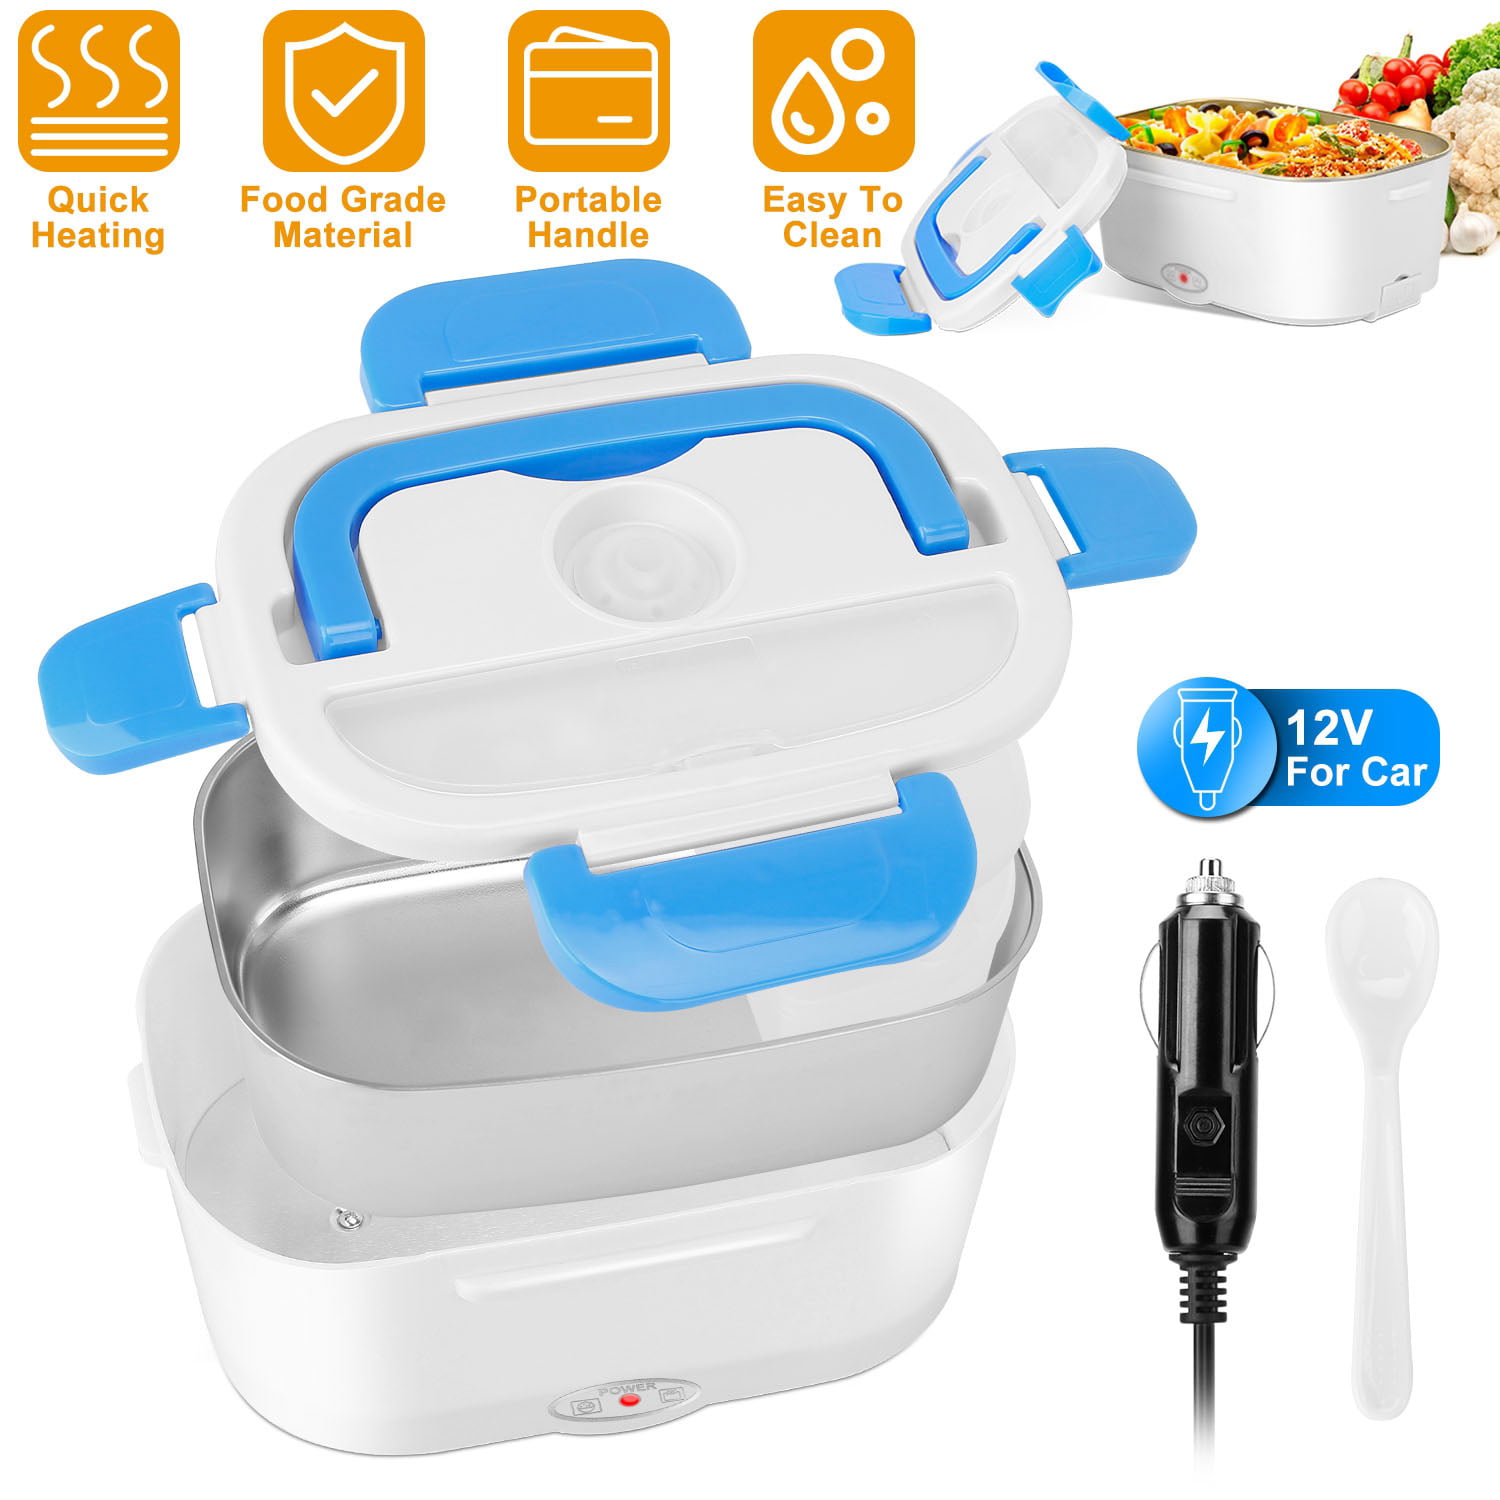 Details about   Home Car Electric Heated Lunch Box Heater Office Food Warmer Container Storage 